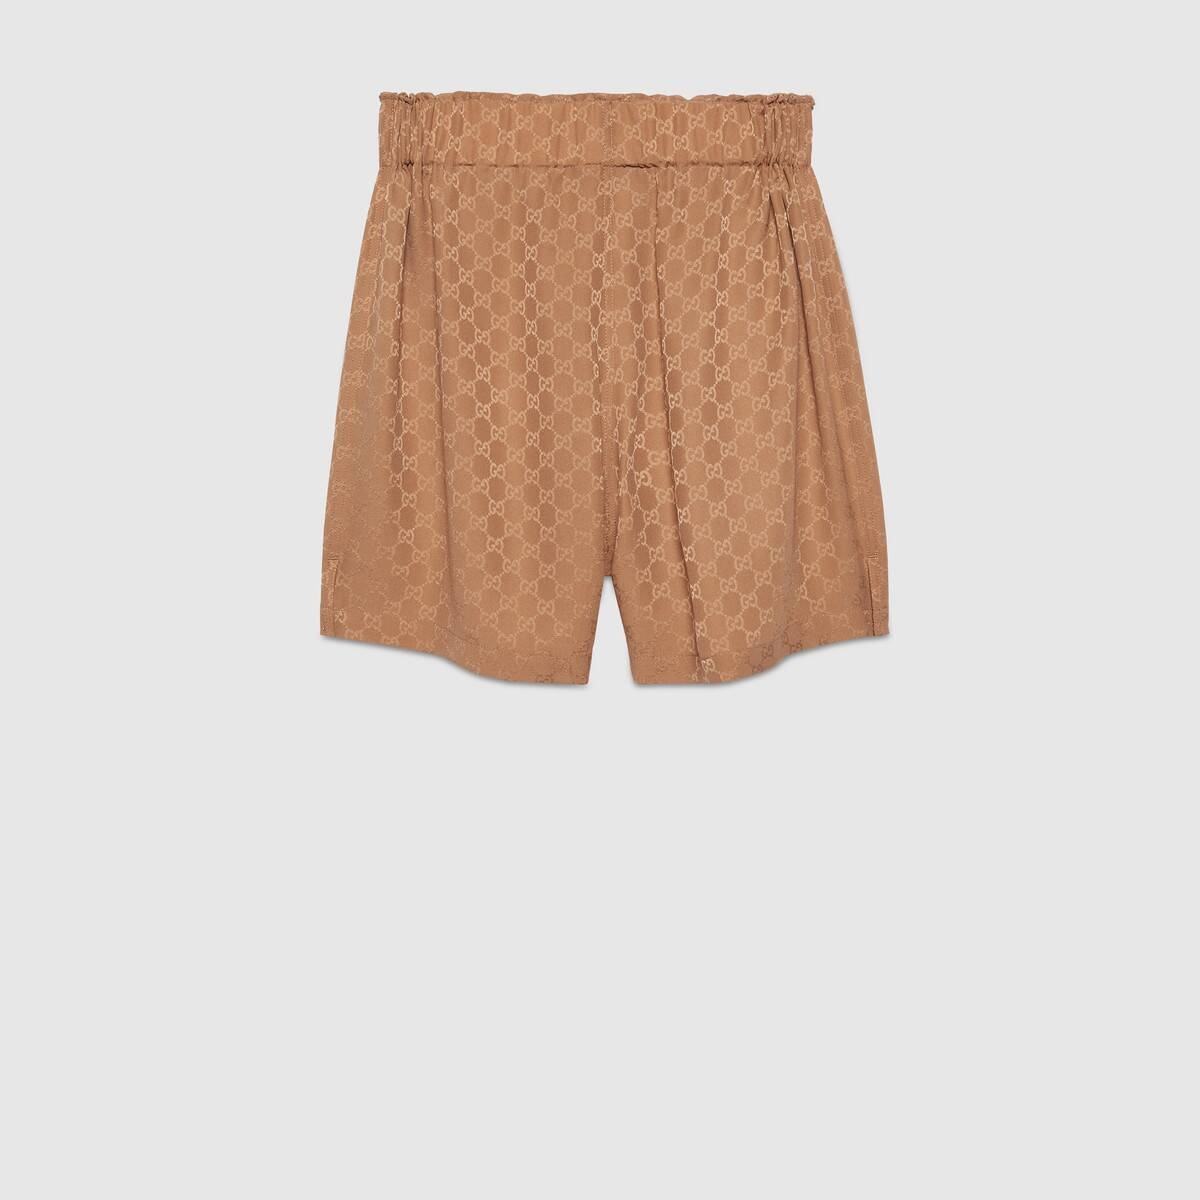 GG silk shorts with Gucci label - 2